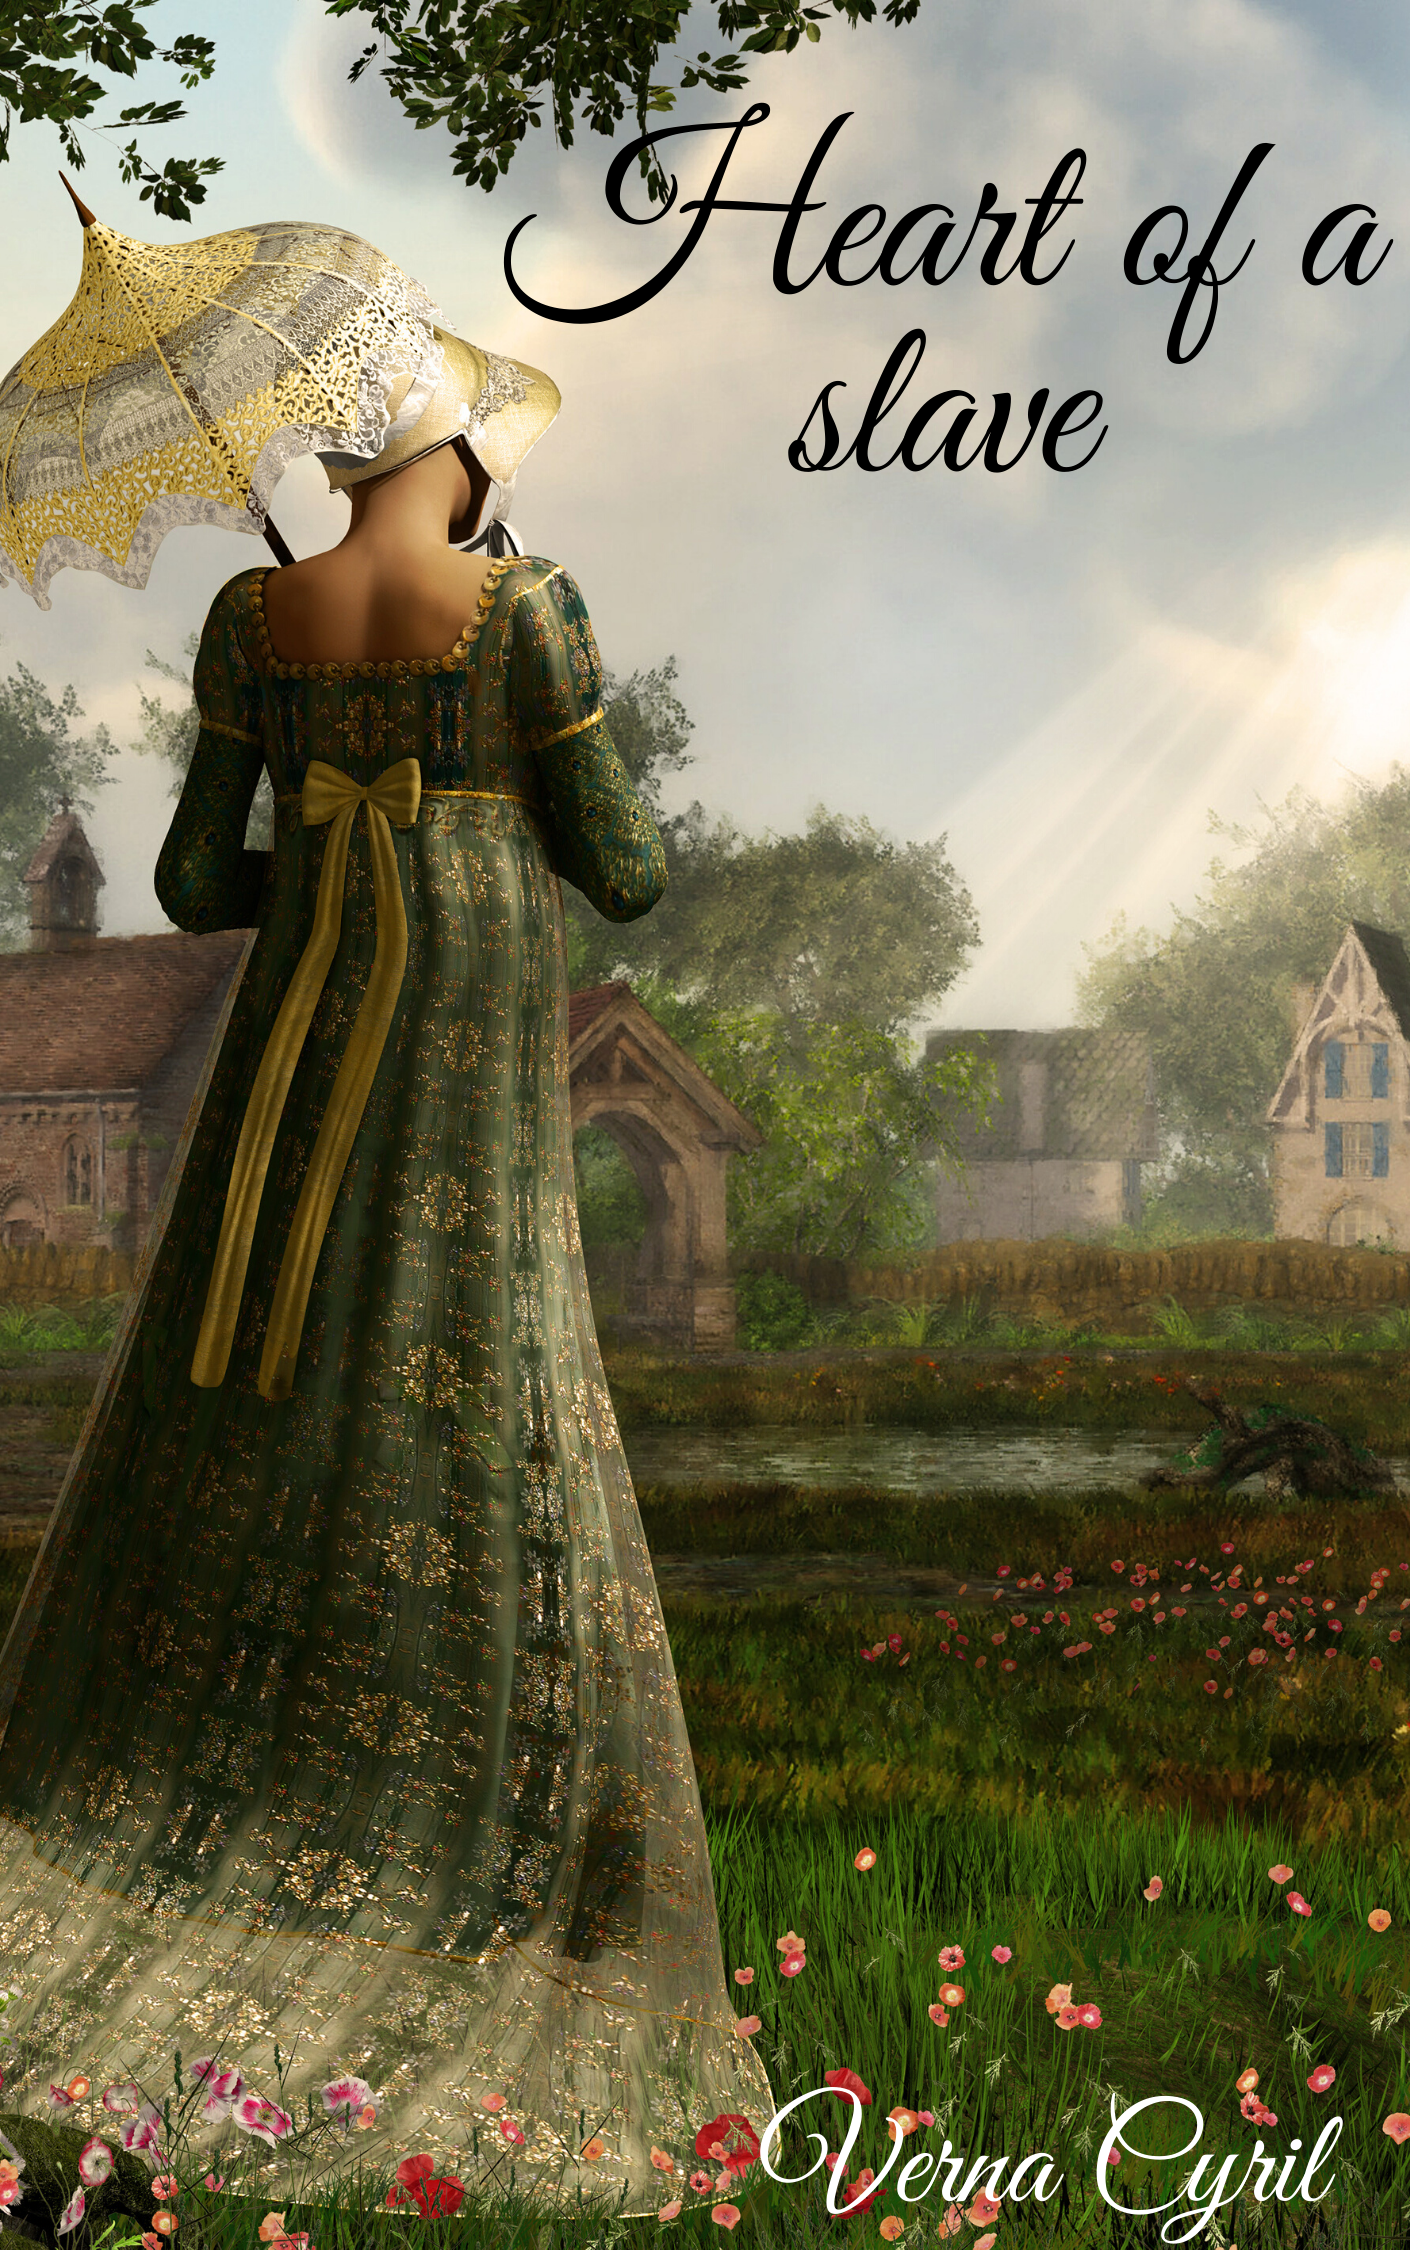 FREE: Heart of a slave by Verna Cyril